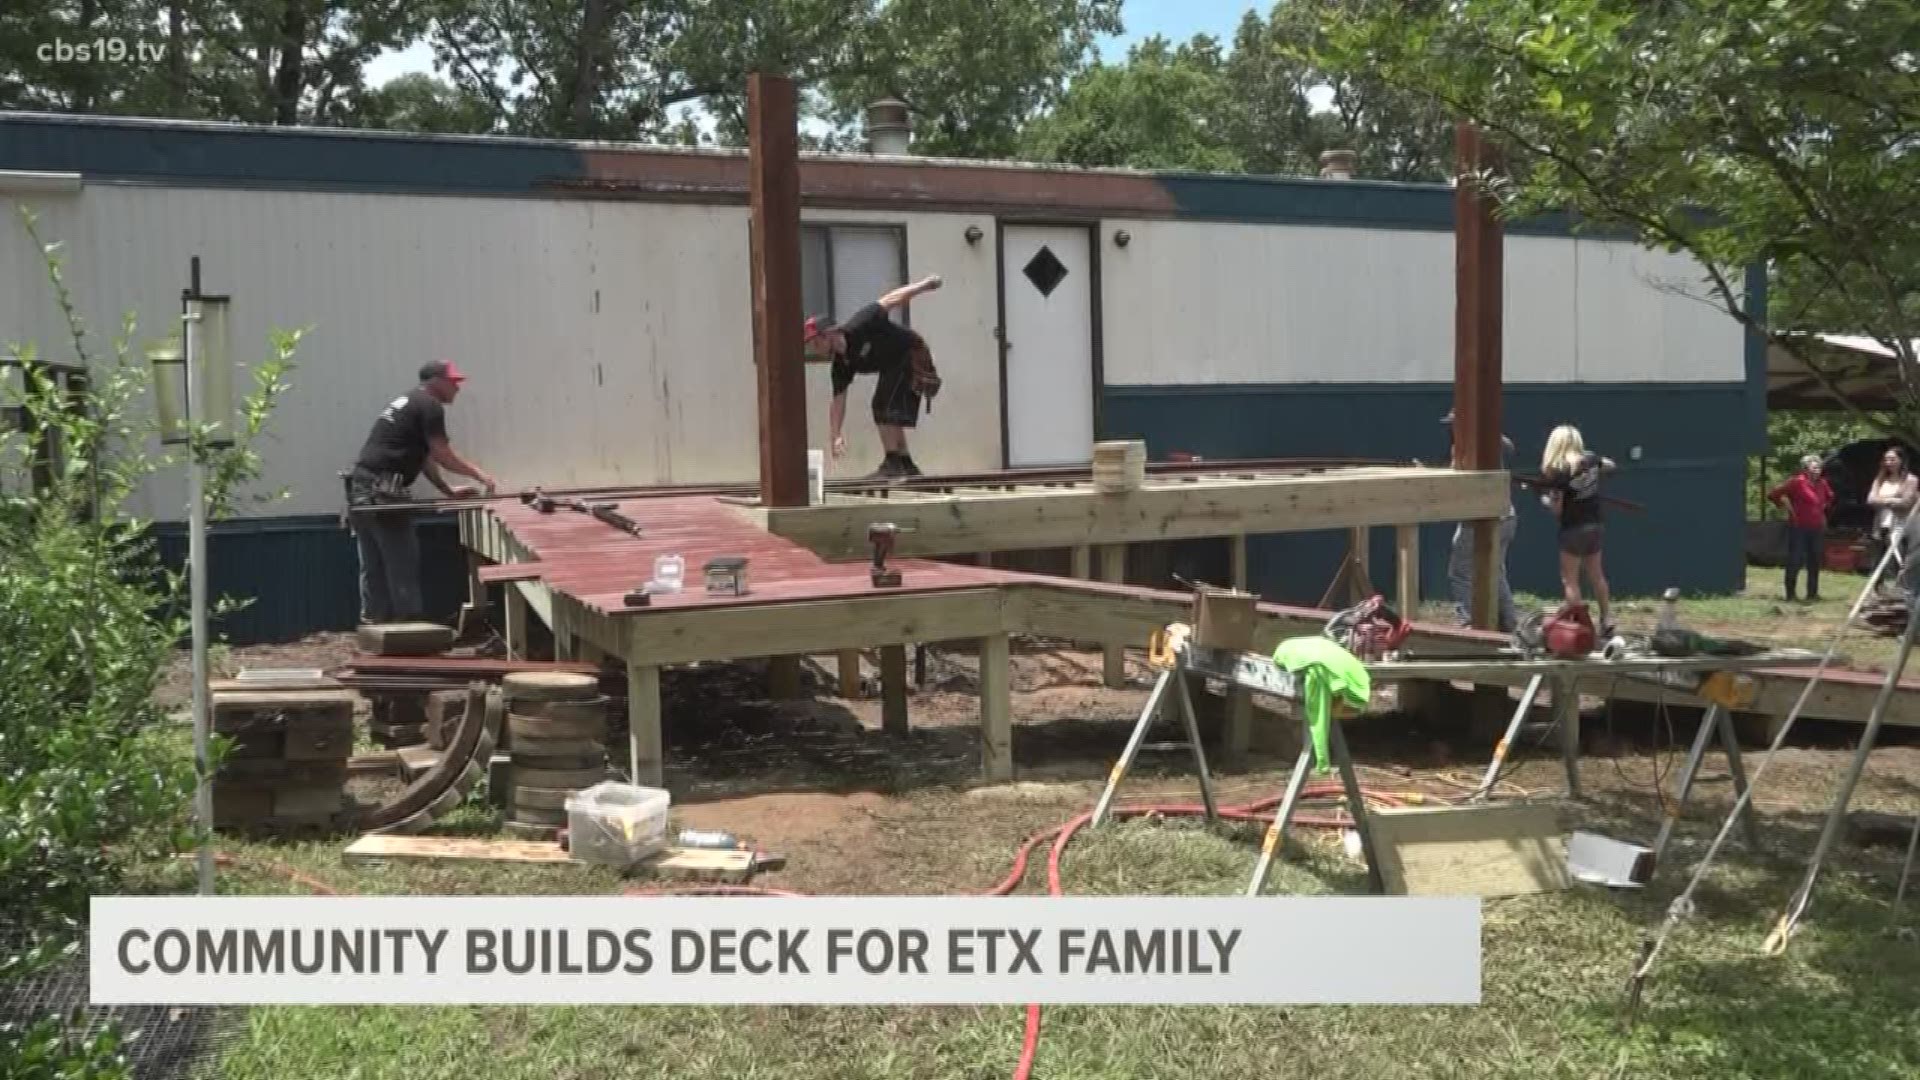 A construction company builds a new deck for a Diana woman after she was paralyzed from an accident.